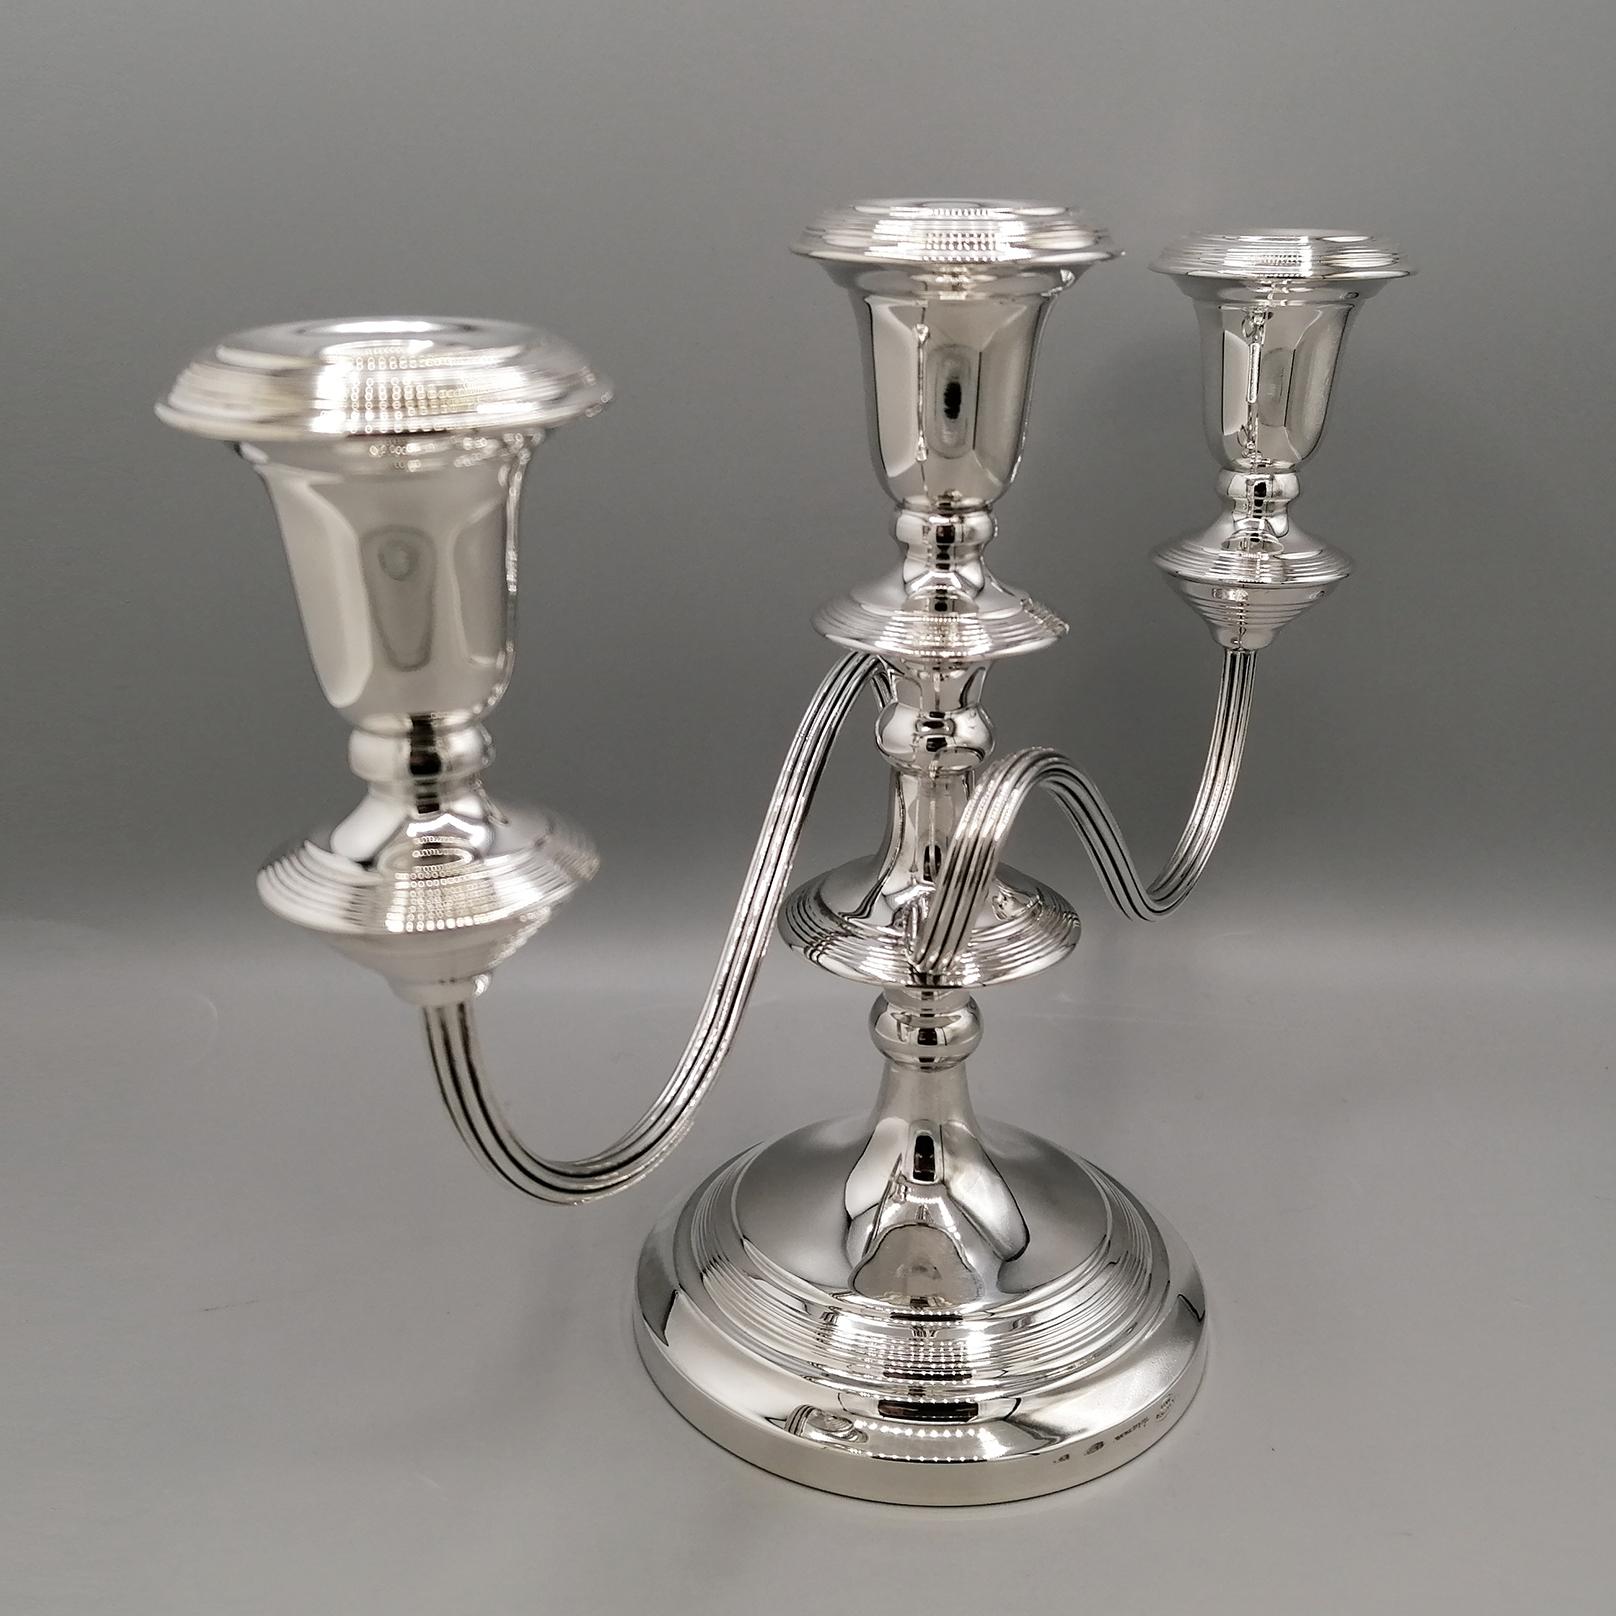 20th Century Italian solid Silver Pr. of Candelabras For Sale 6